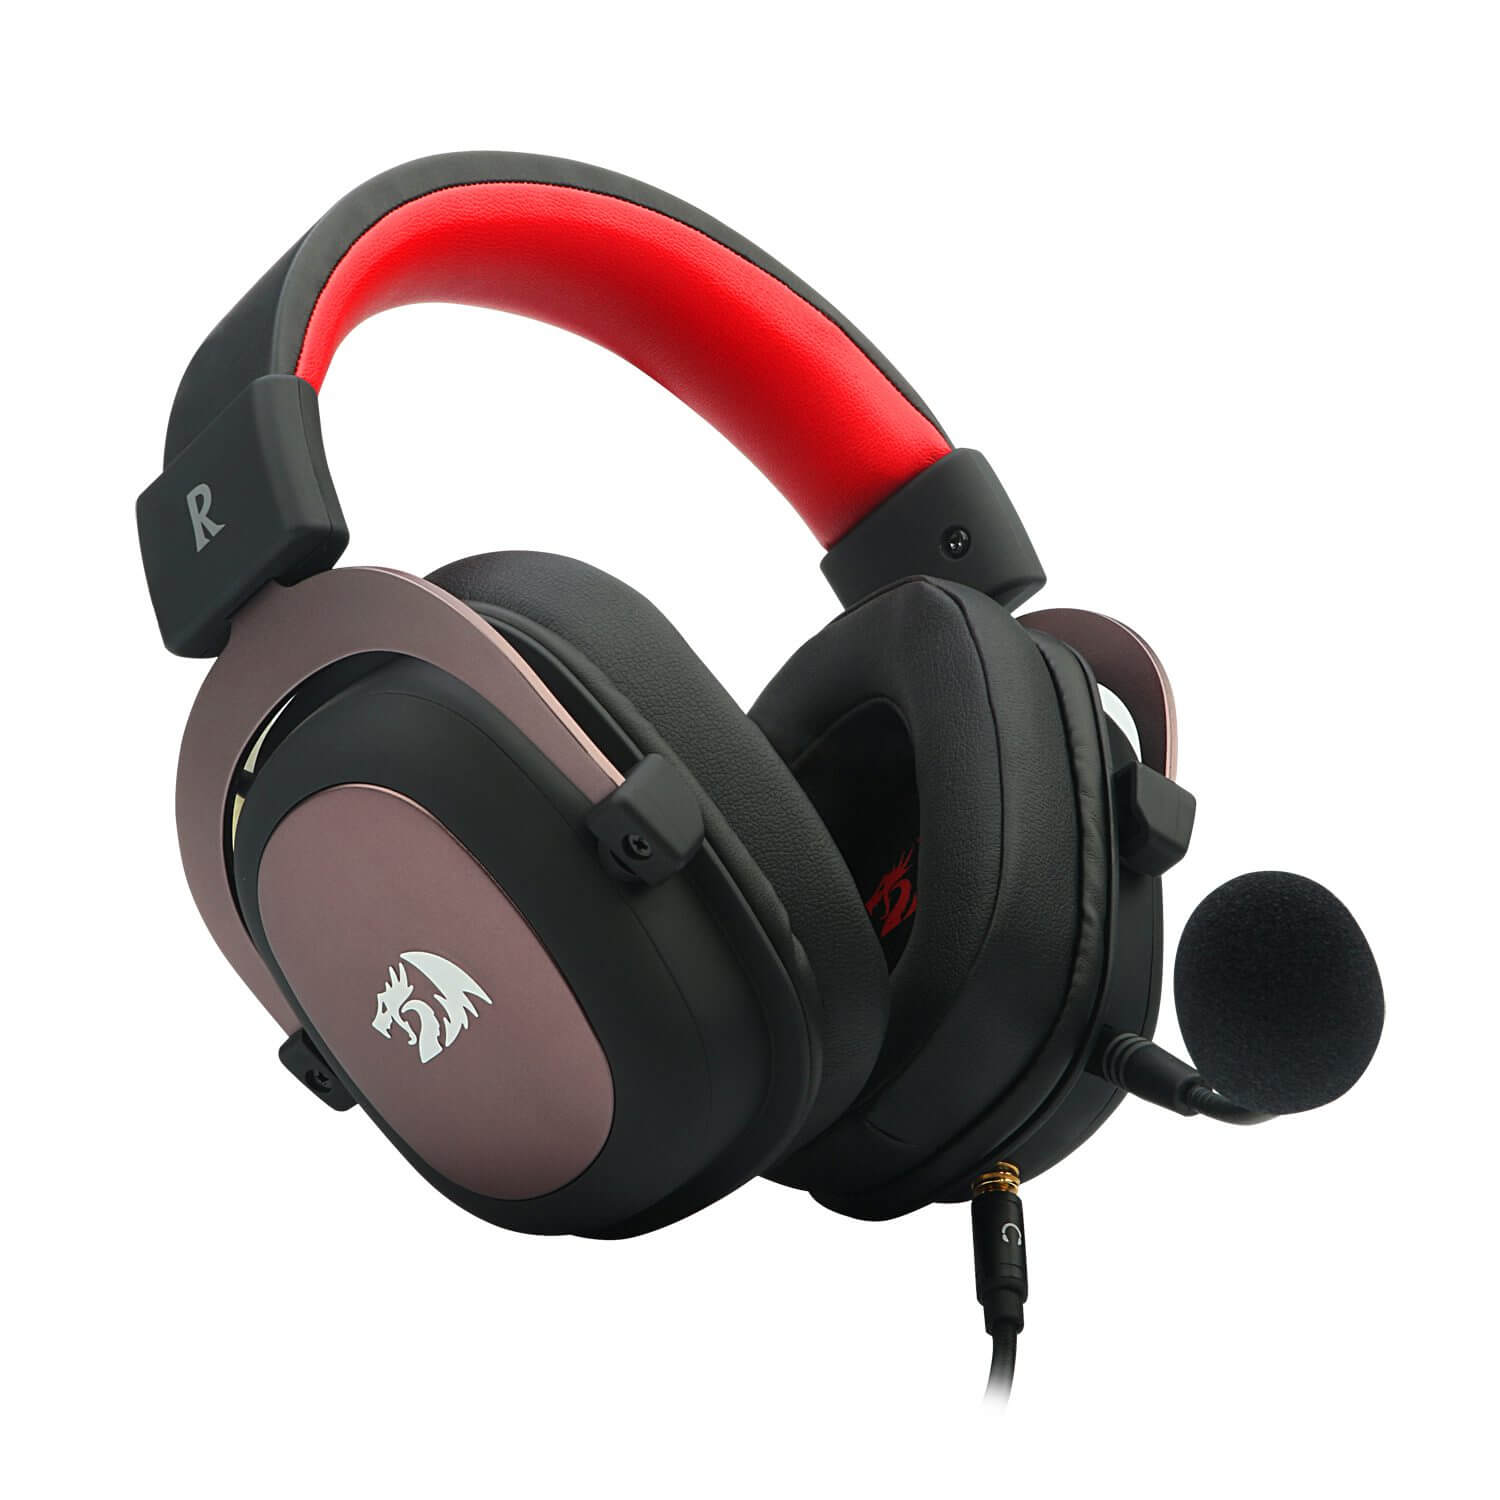 Redragon H510-1 Zeus 2 Wired Gaming Headset - 7.1 Surround Sound - Memory Foam Ear Pads - 53MM Drivers - Detachable Microphone - Multi-Platforms Headphone - Works with PC, PS4/3 & Xbox One/Series X, NS